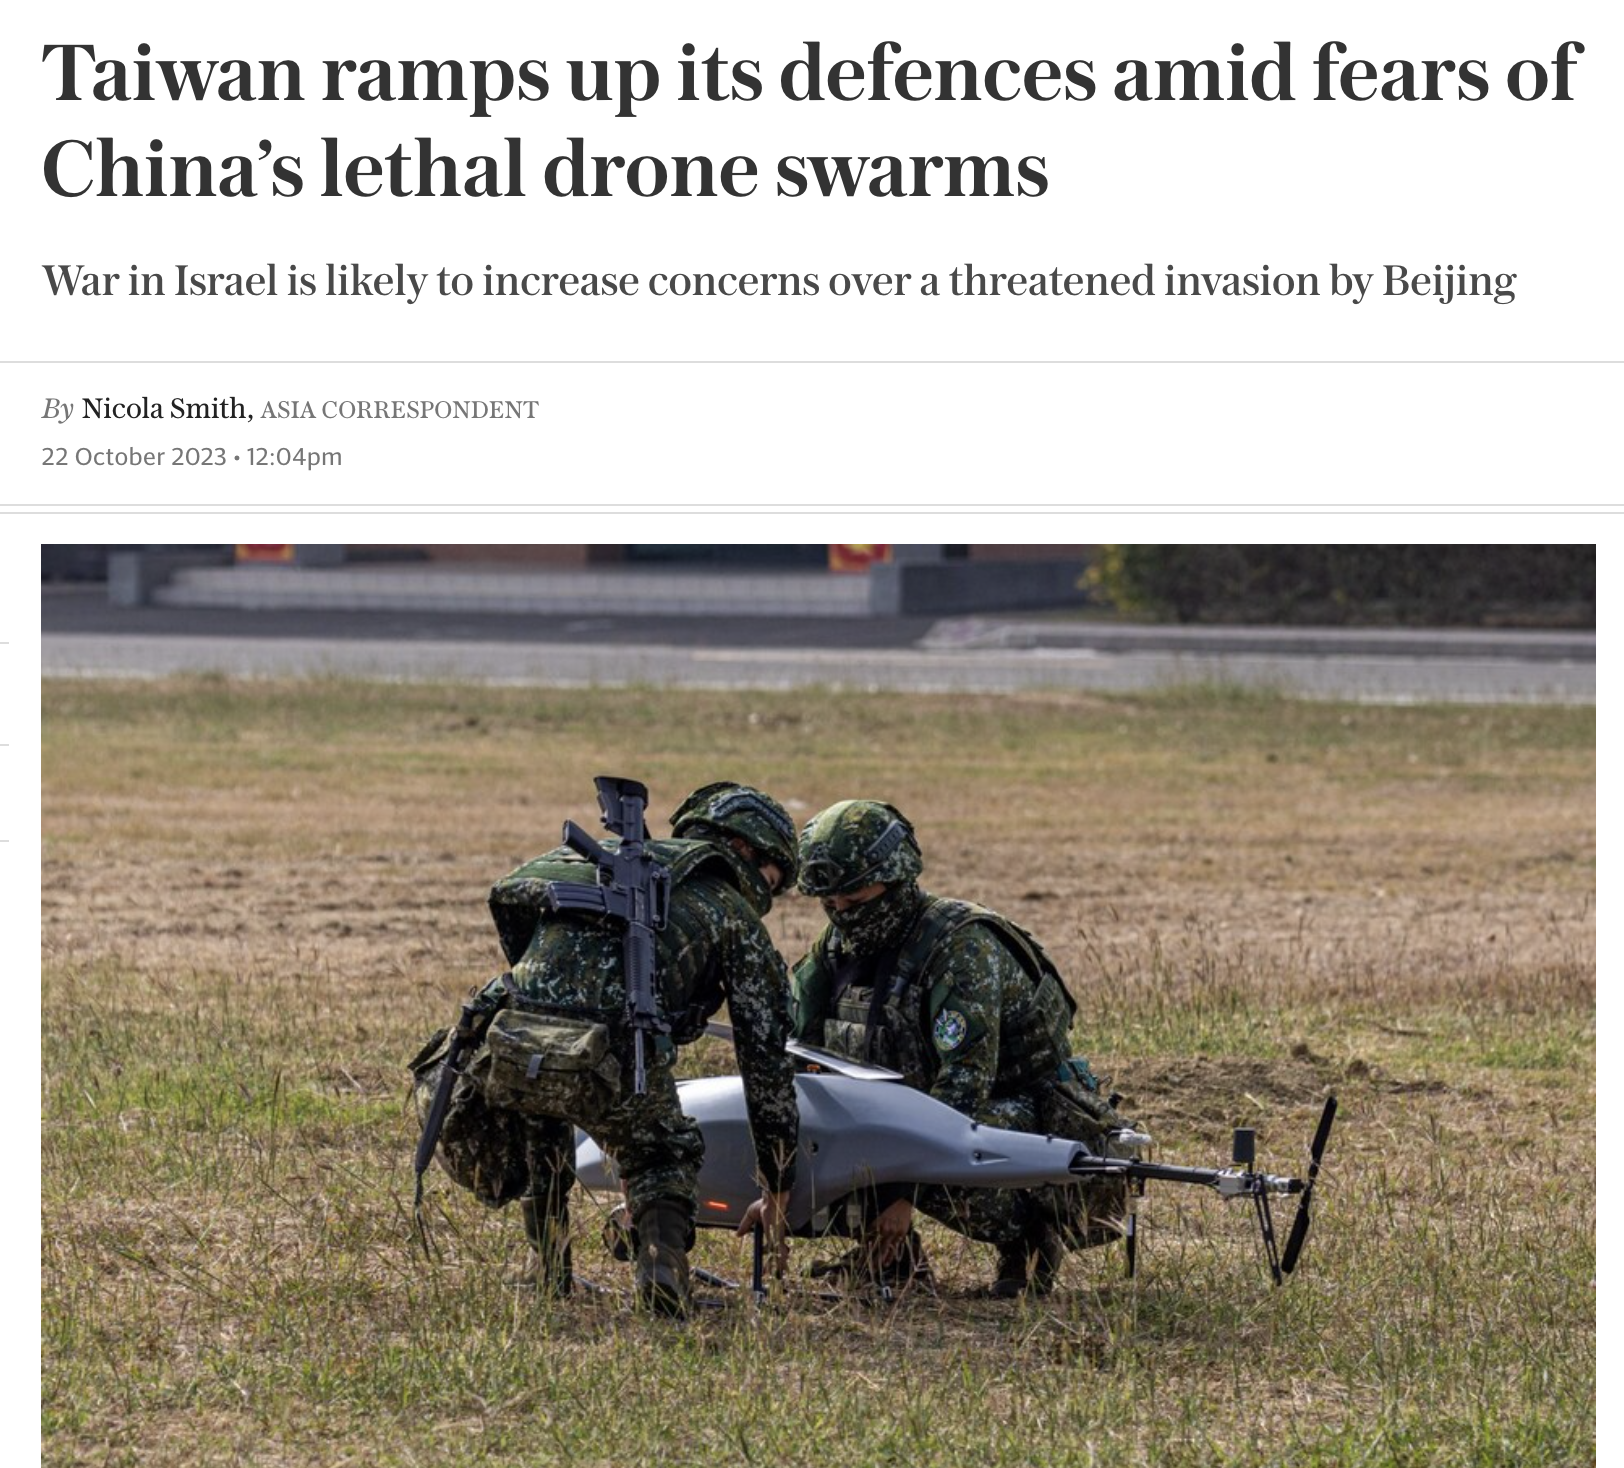 Taiwan ramps up its defences amid fears of China’s lethal drone swarms